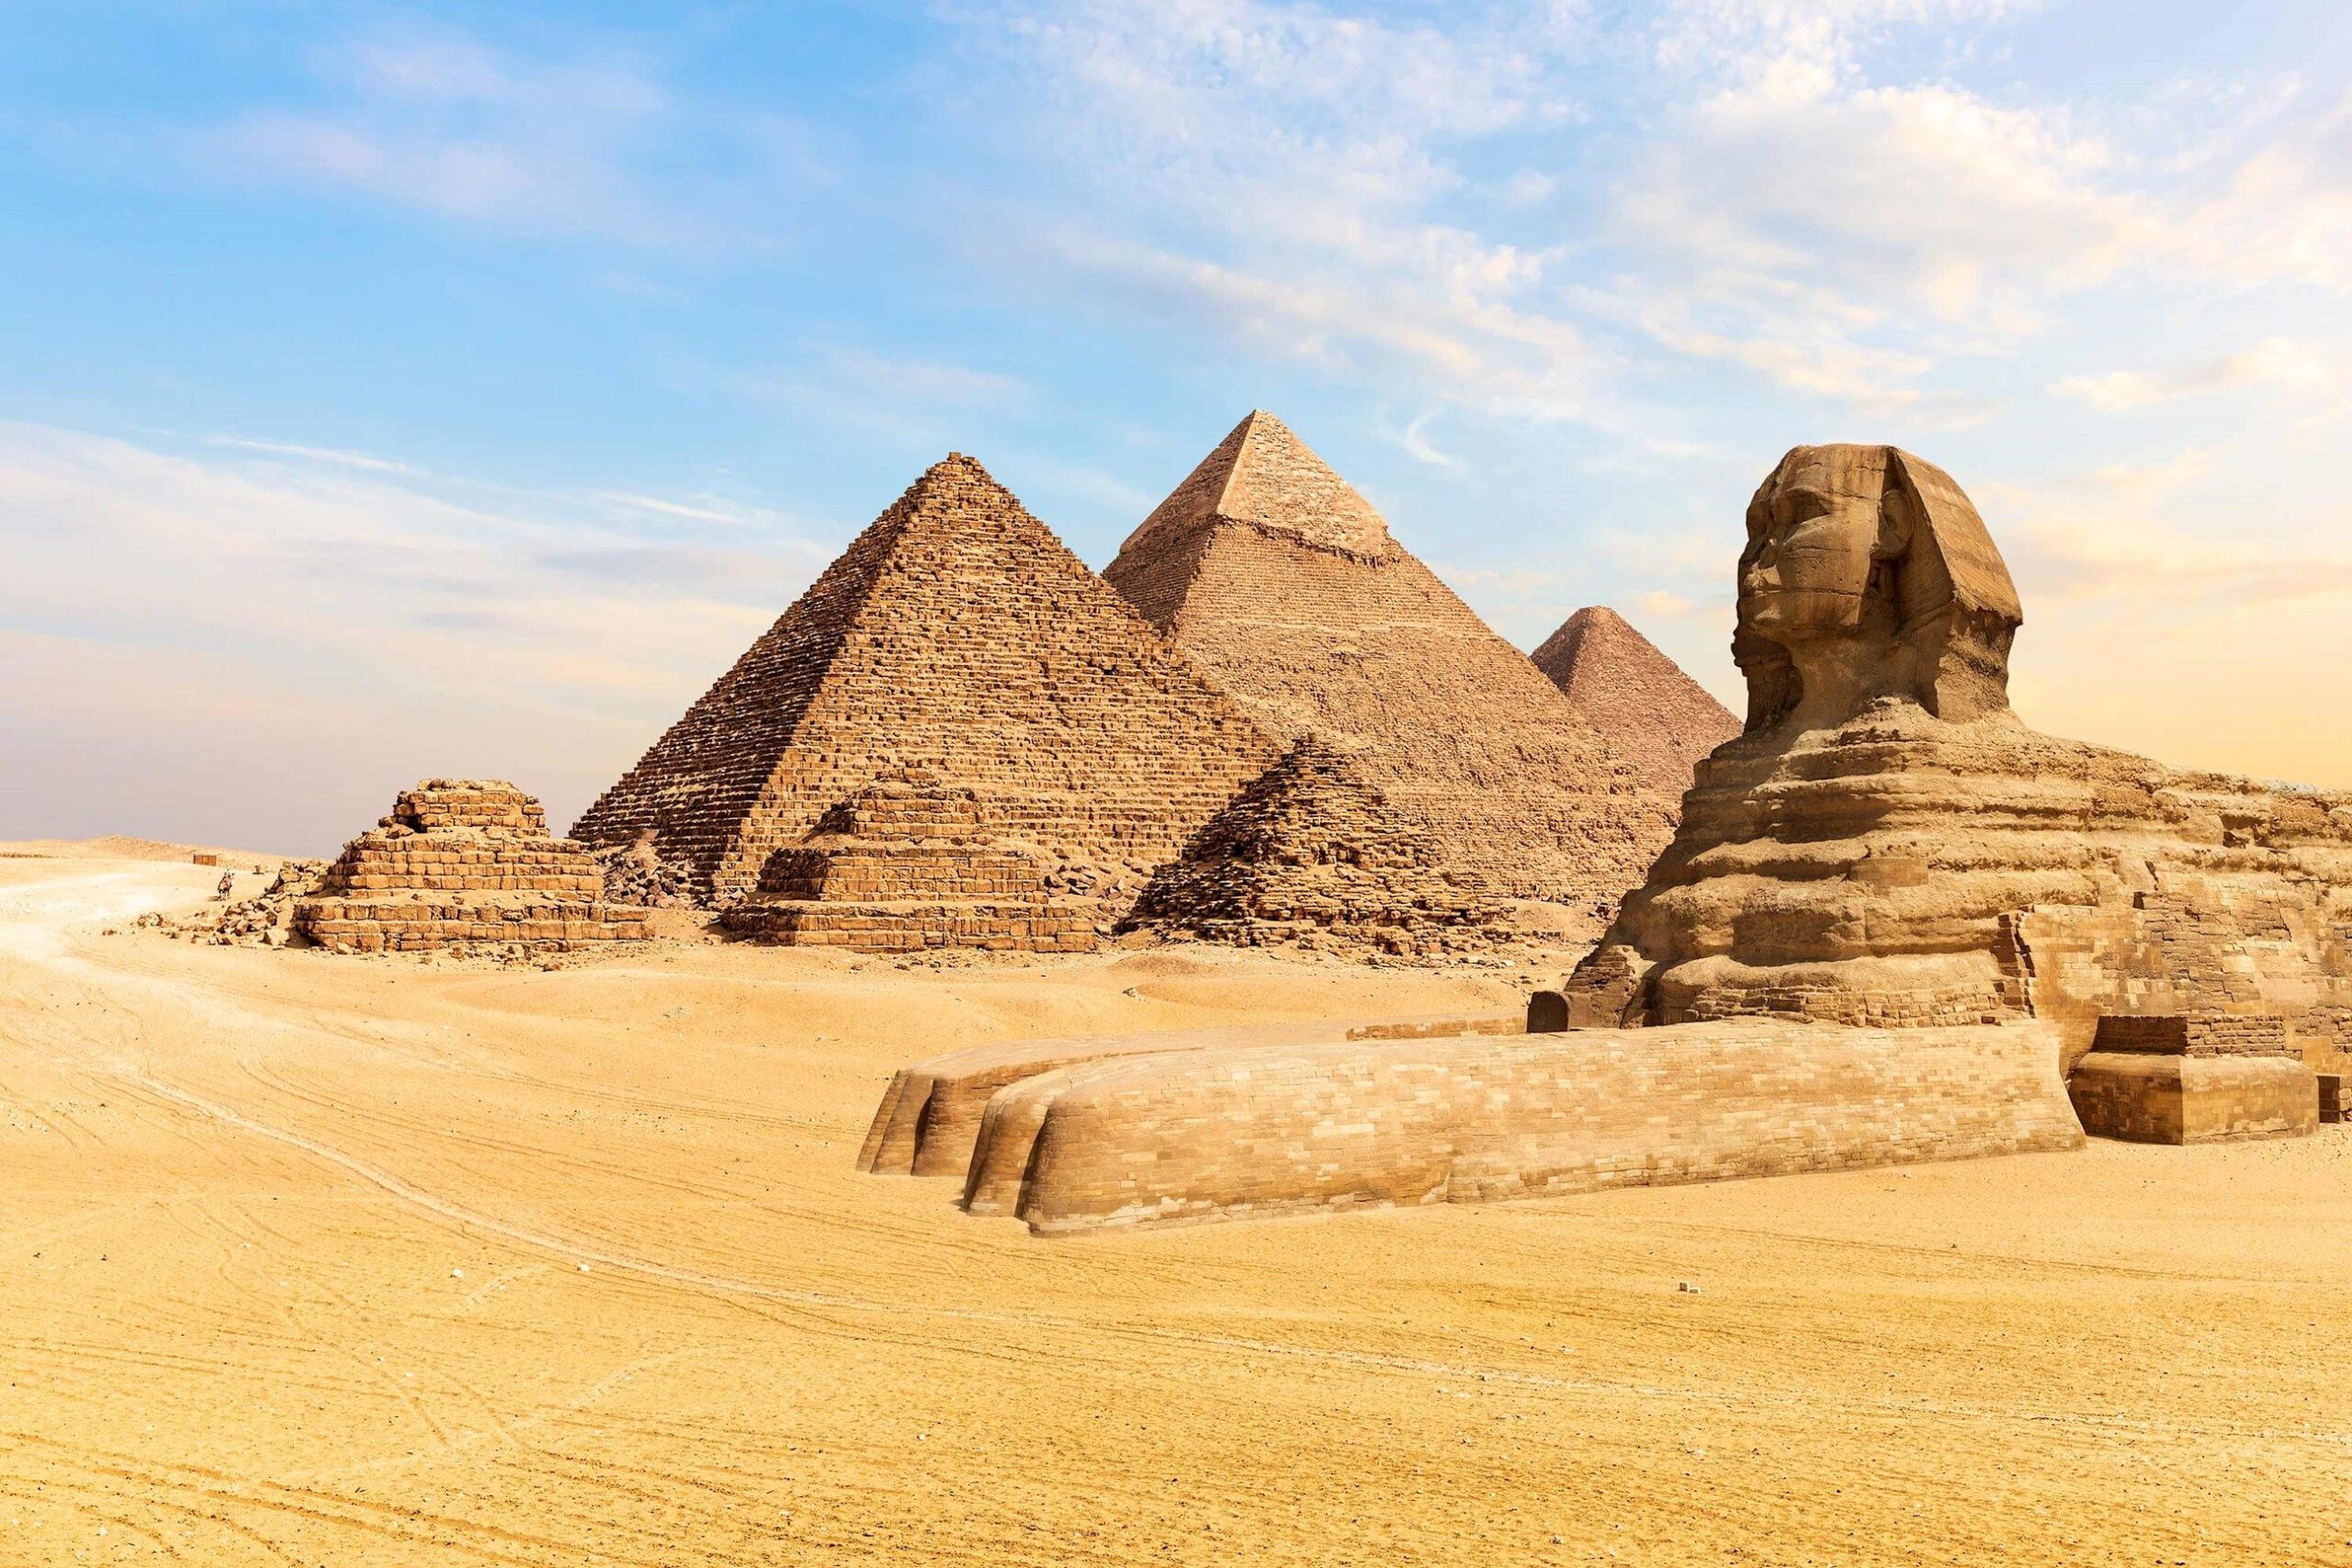 Full Day Pyramids of Giza and Sphinx & The Egyptian Museum with a Private Guide.